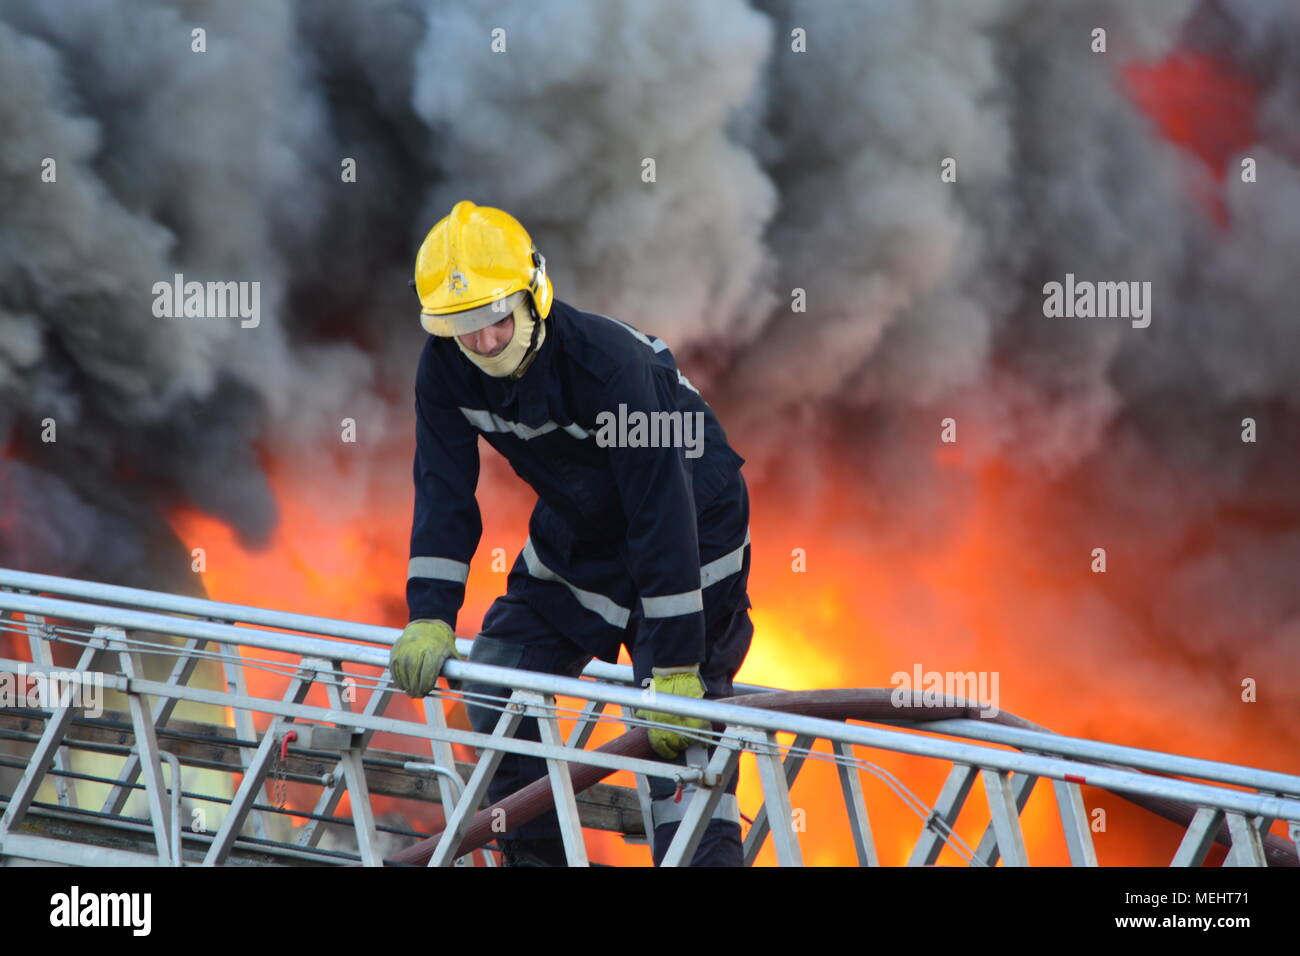 Kashar, Tirana-Albania, 22 April 2018. Huge fire burns completely a recycling company  in Kashar,  10 fire-units already on the scene struggling to extinguish the flames. NO injures or fatalities are reported Credit: Antonio Cakshiri/Alamy Live News Stock Photo